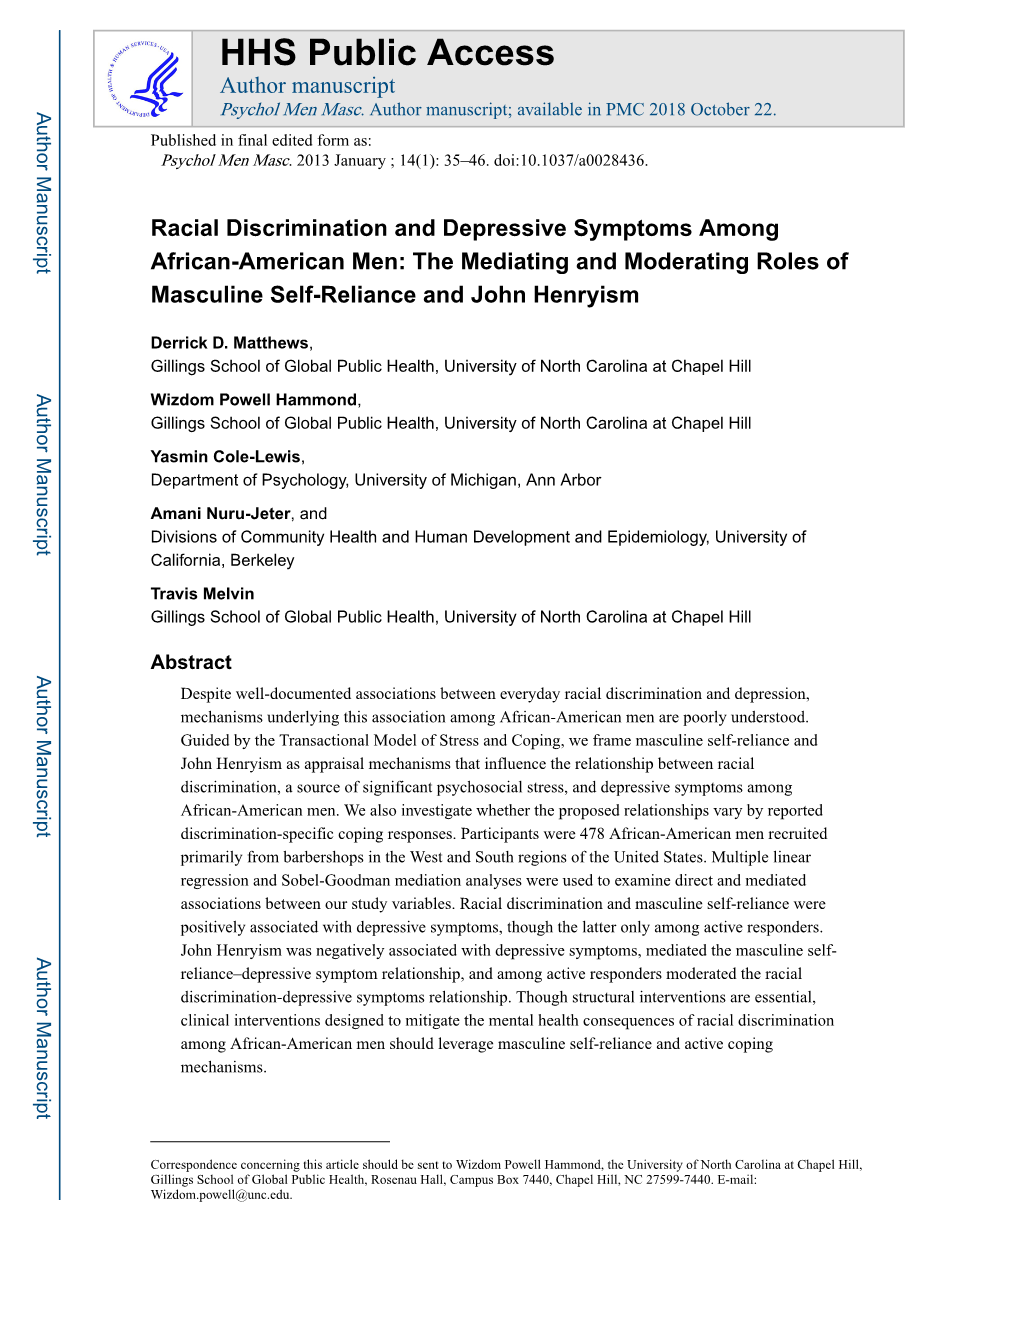 Racial Discrimination and Depressive Symptoms Among African-American Men: the Mediating and Moderating Roles of Masculine Self-Reliance and John Henryism